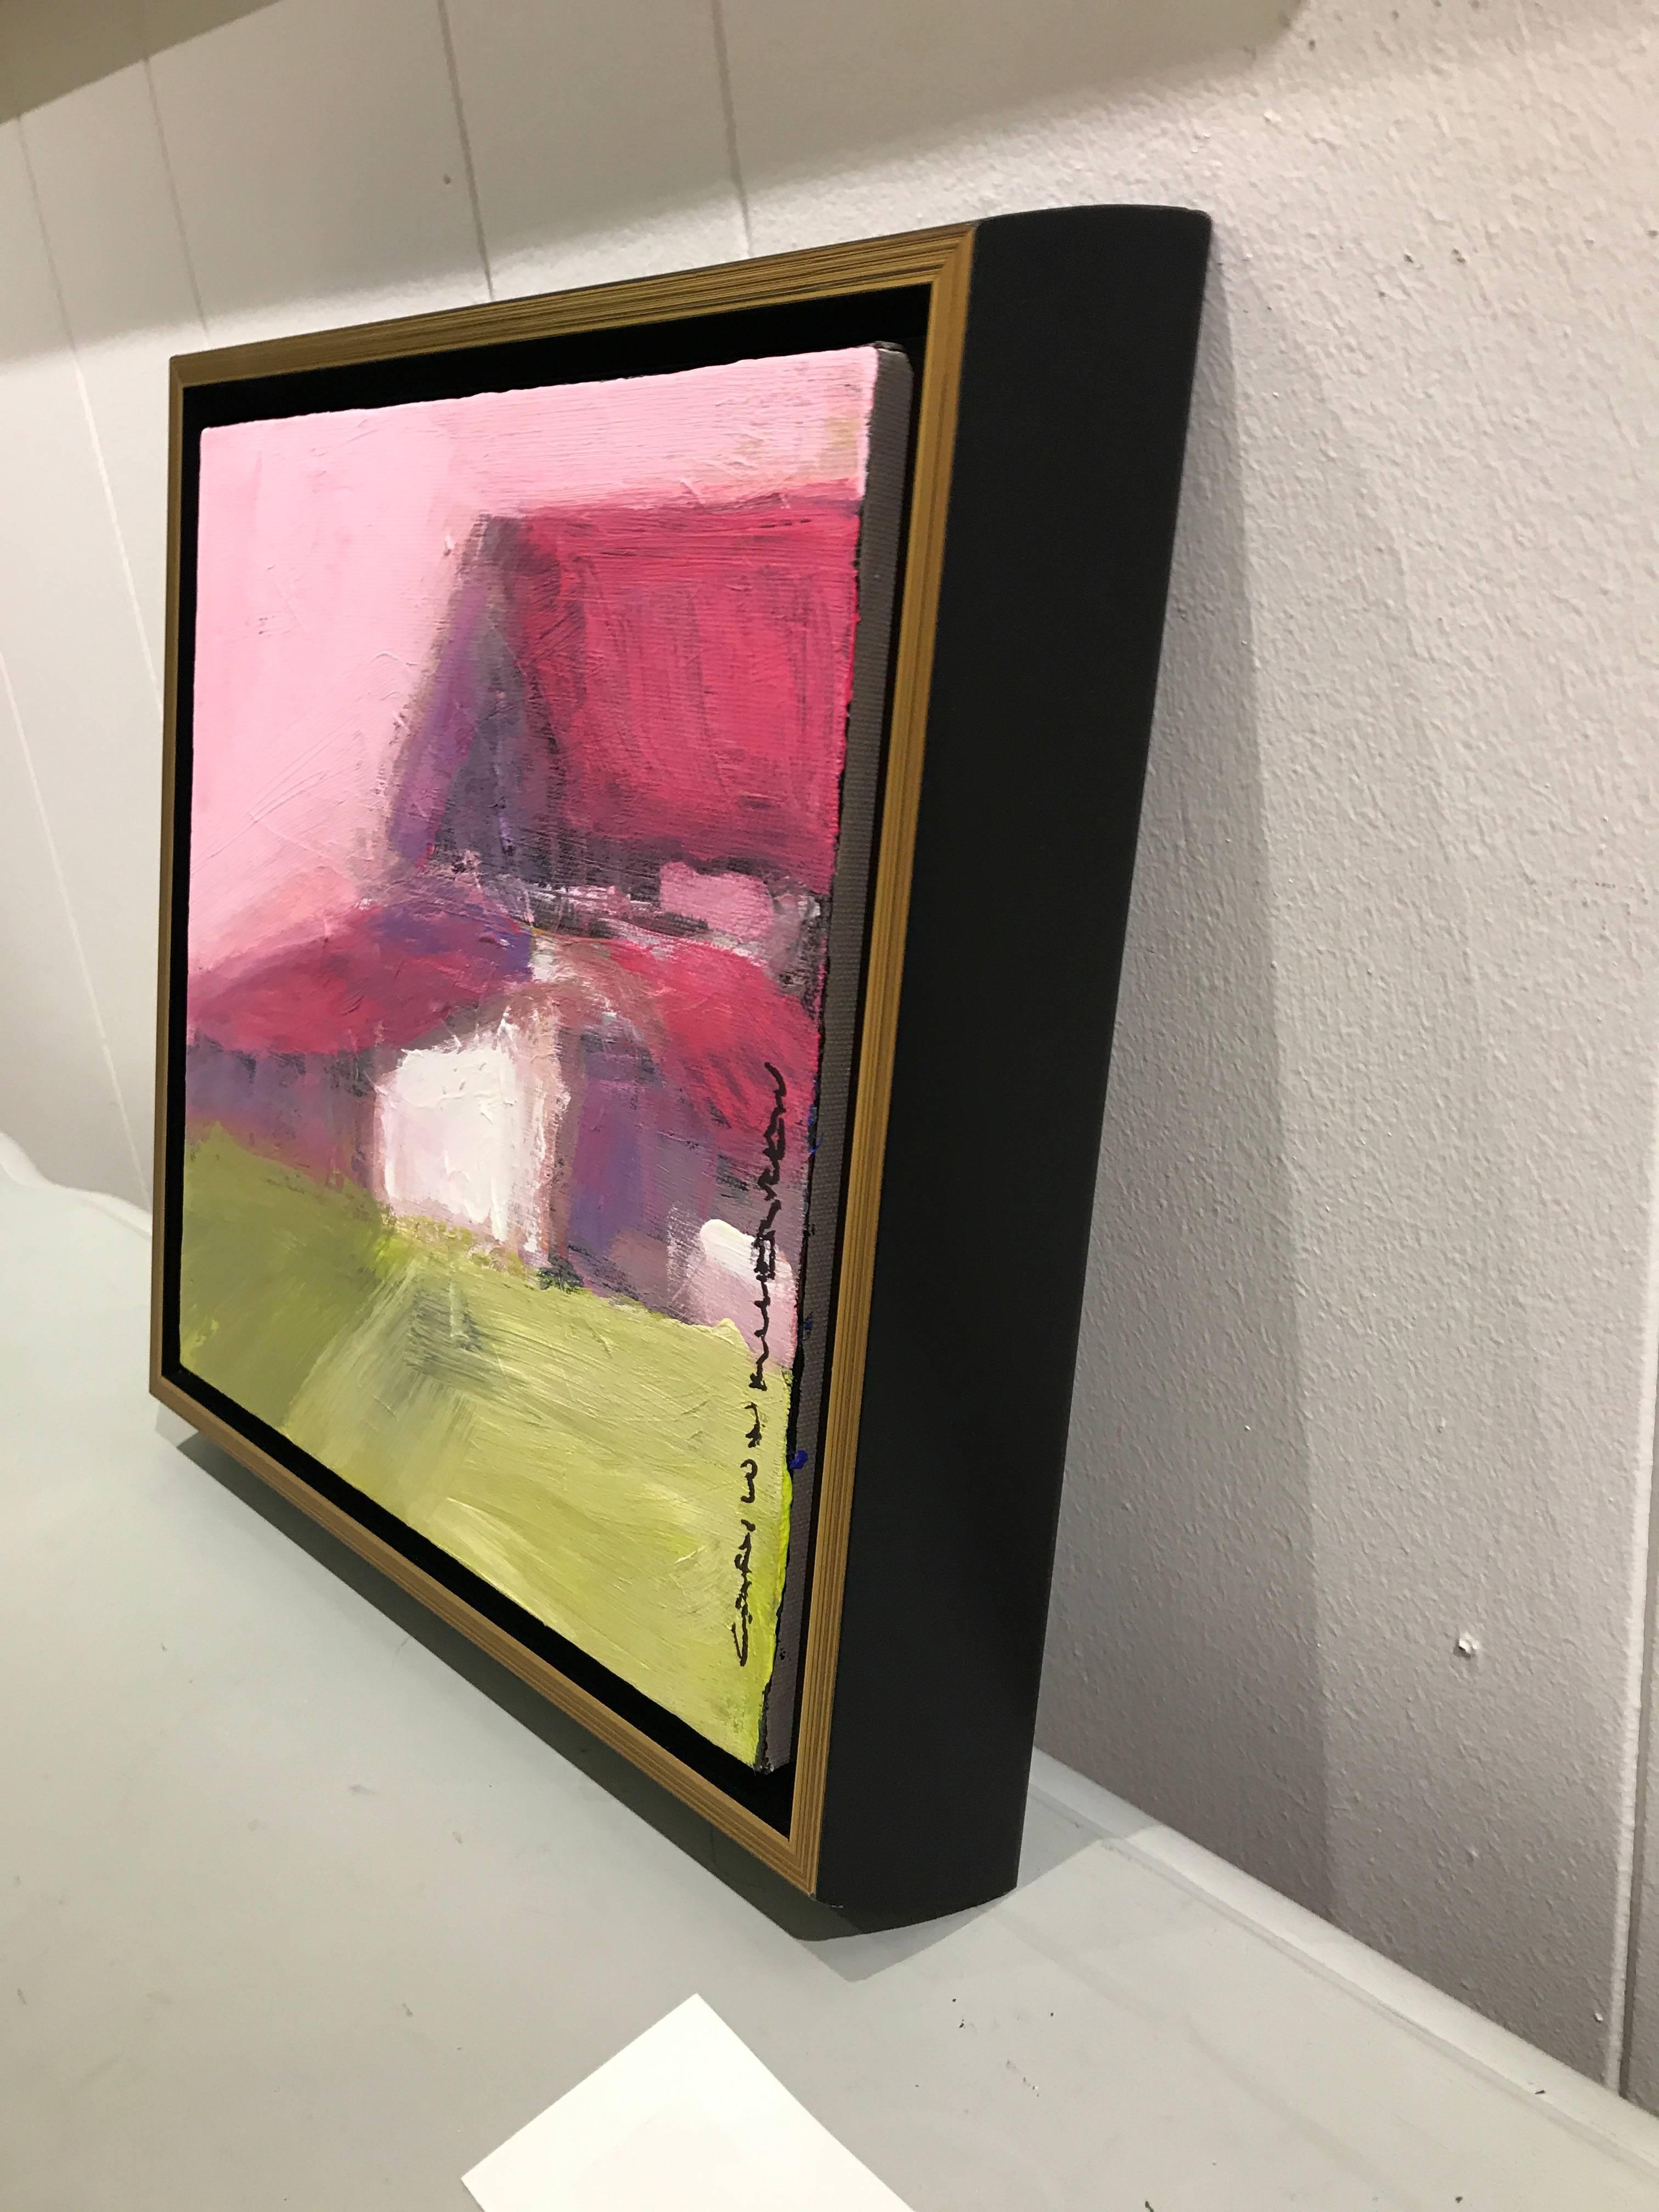 This contemporary piece by Carylon Killebrew is a new take on a barn.  A familiar structure, but Carylon has injected color to add a contemporary edge to this beautiful piece.  Small enough to took in a bookcase or hang in a grouping, this little